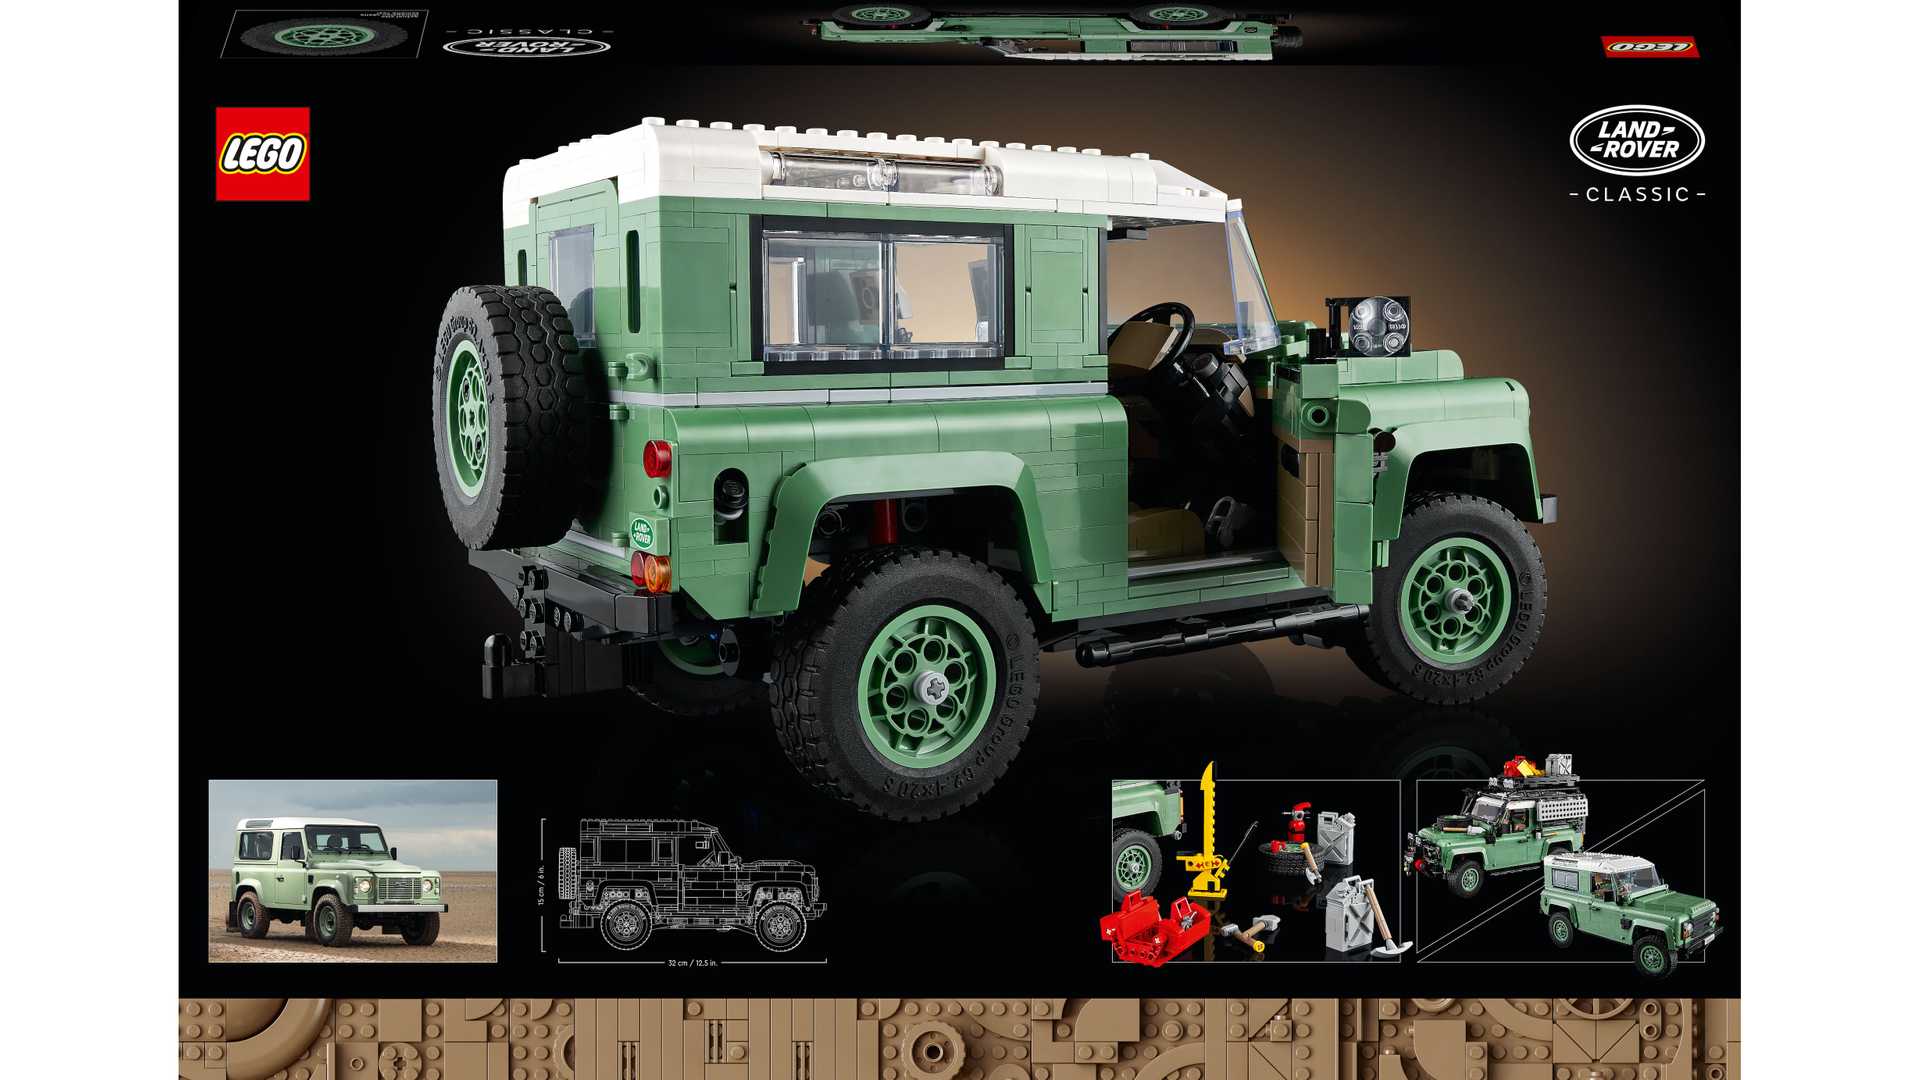 Lego-Icons-Classic-Land-Rover-Defender-90-52